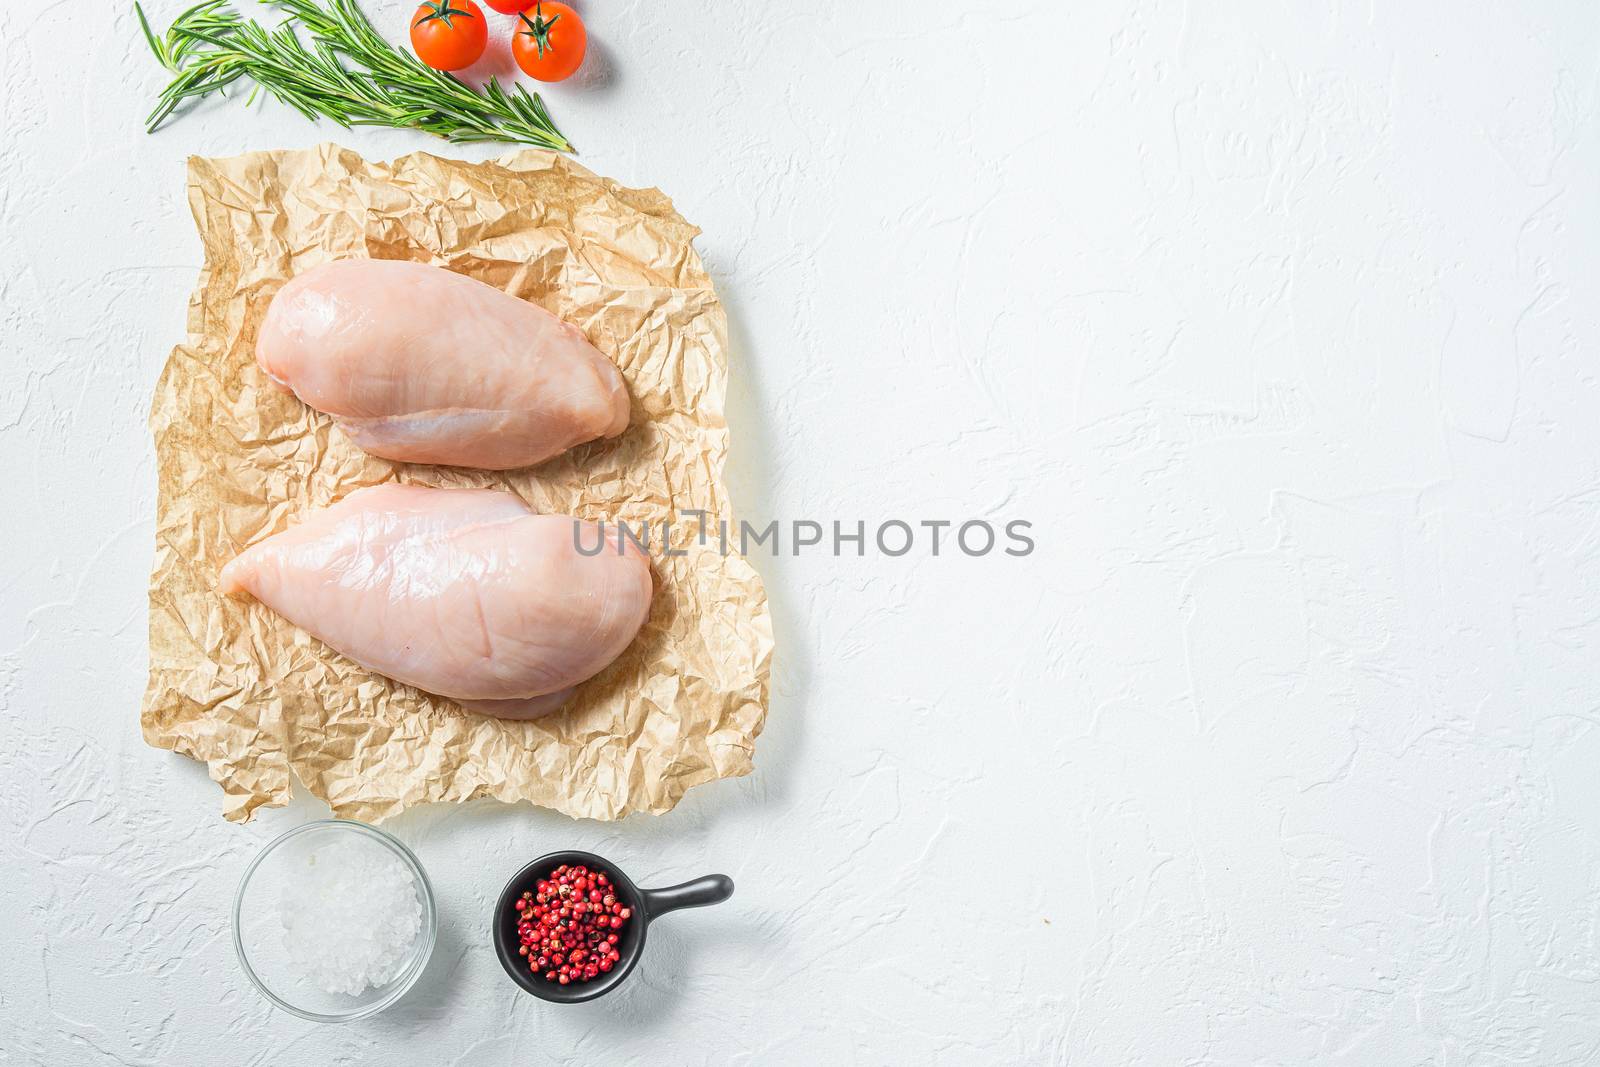 Raw meat, ready for grill or barbeque chicken breast filet, with herbs and spices on craft paper over white background, top view space for text